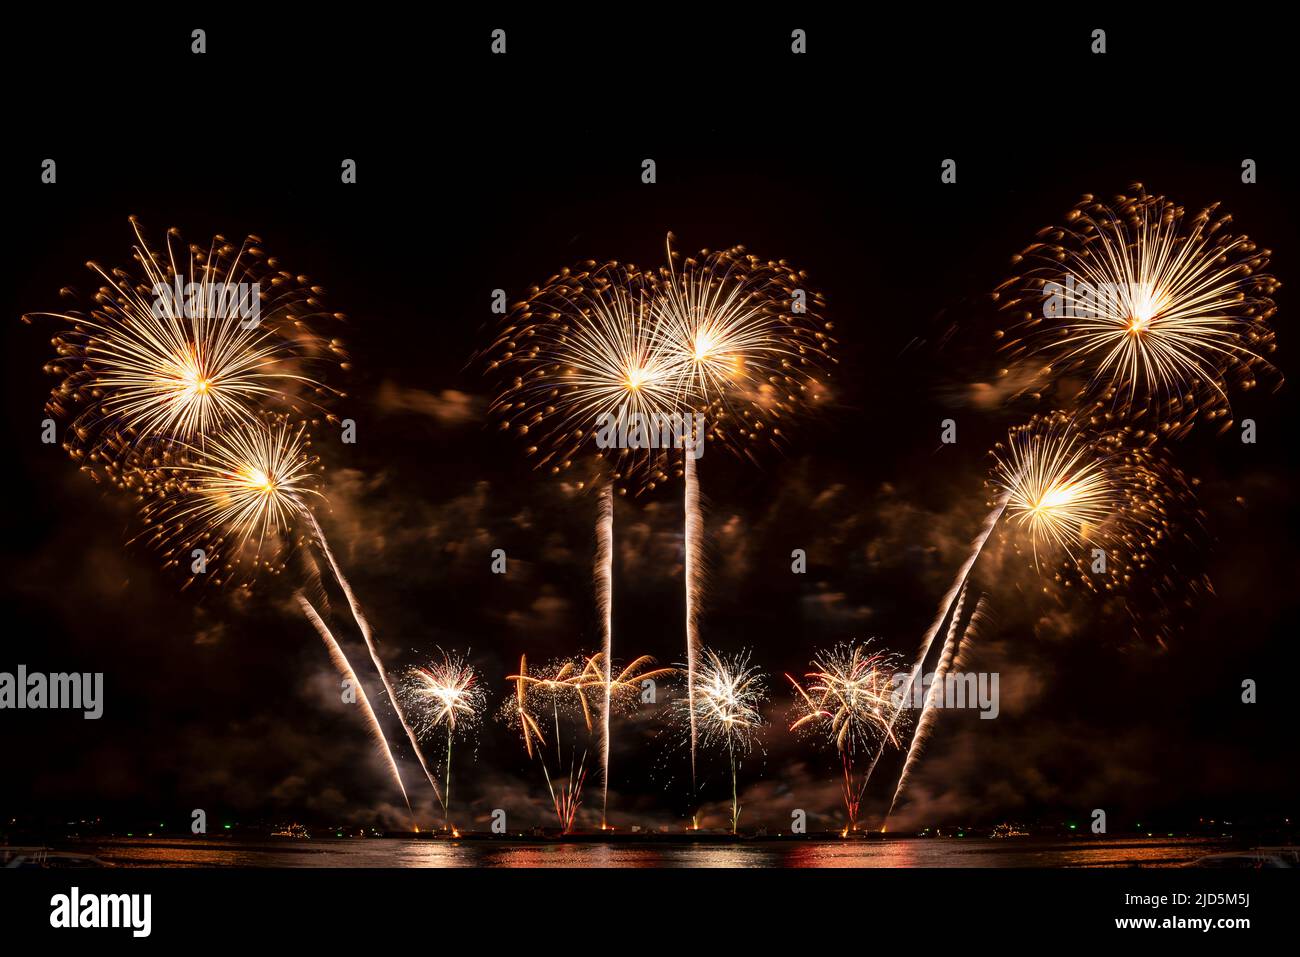 Real Fireworks display celebration, Colorful New Year Firework Stock Photo